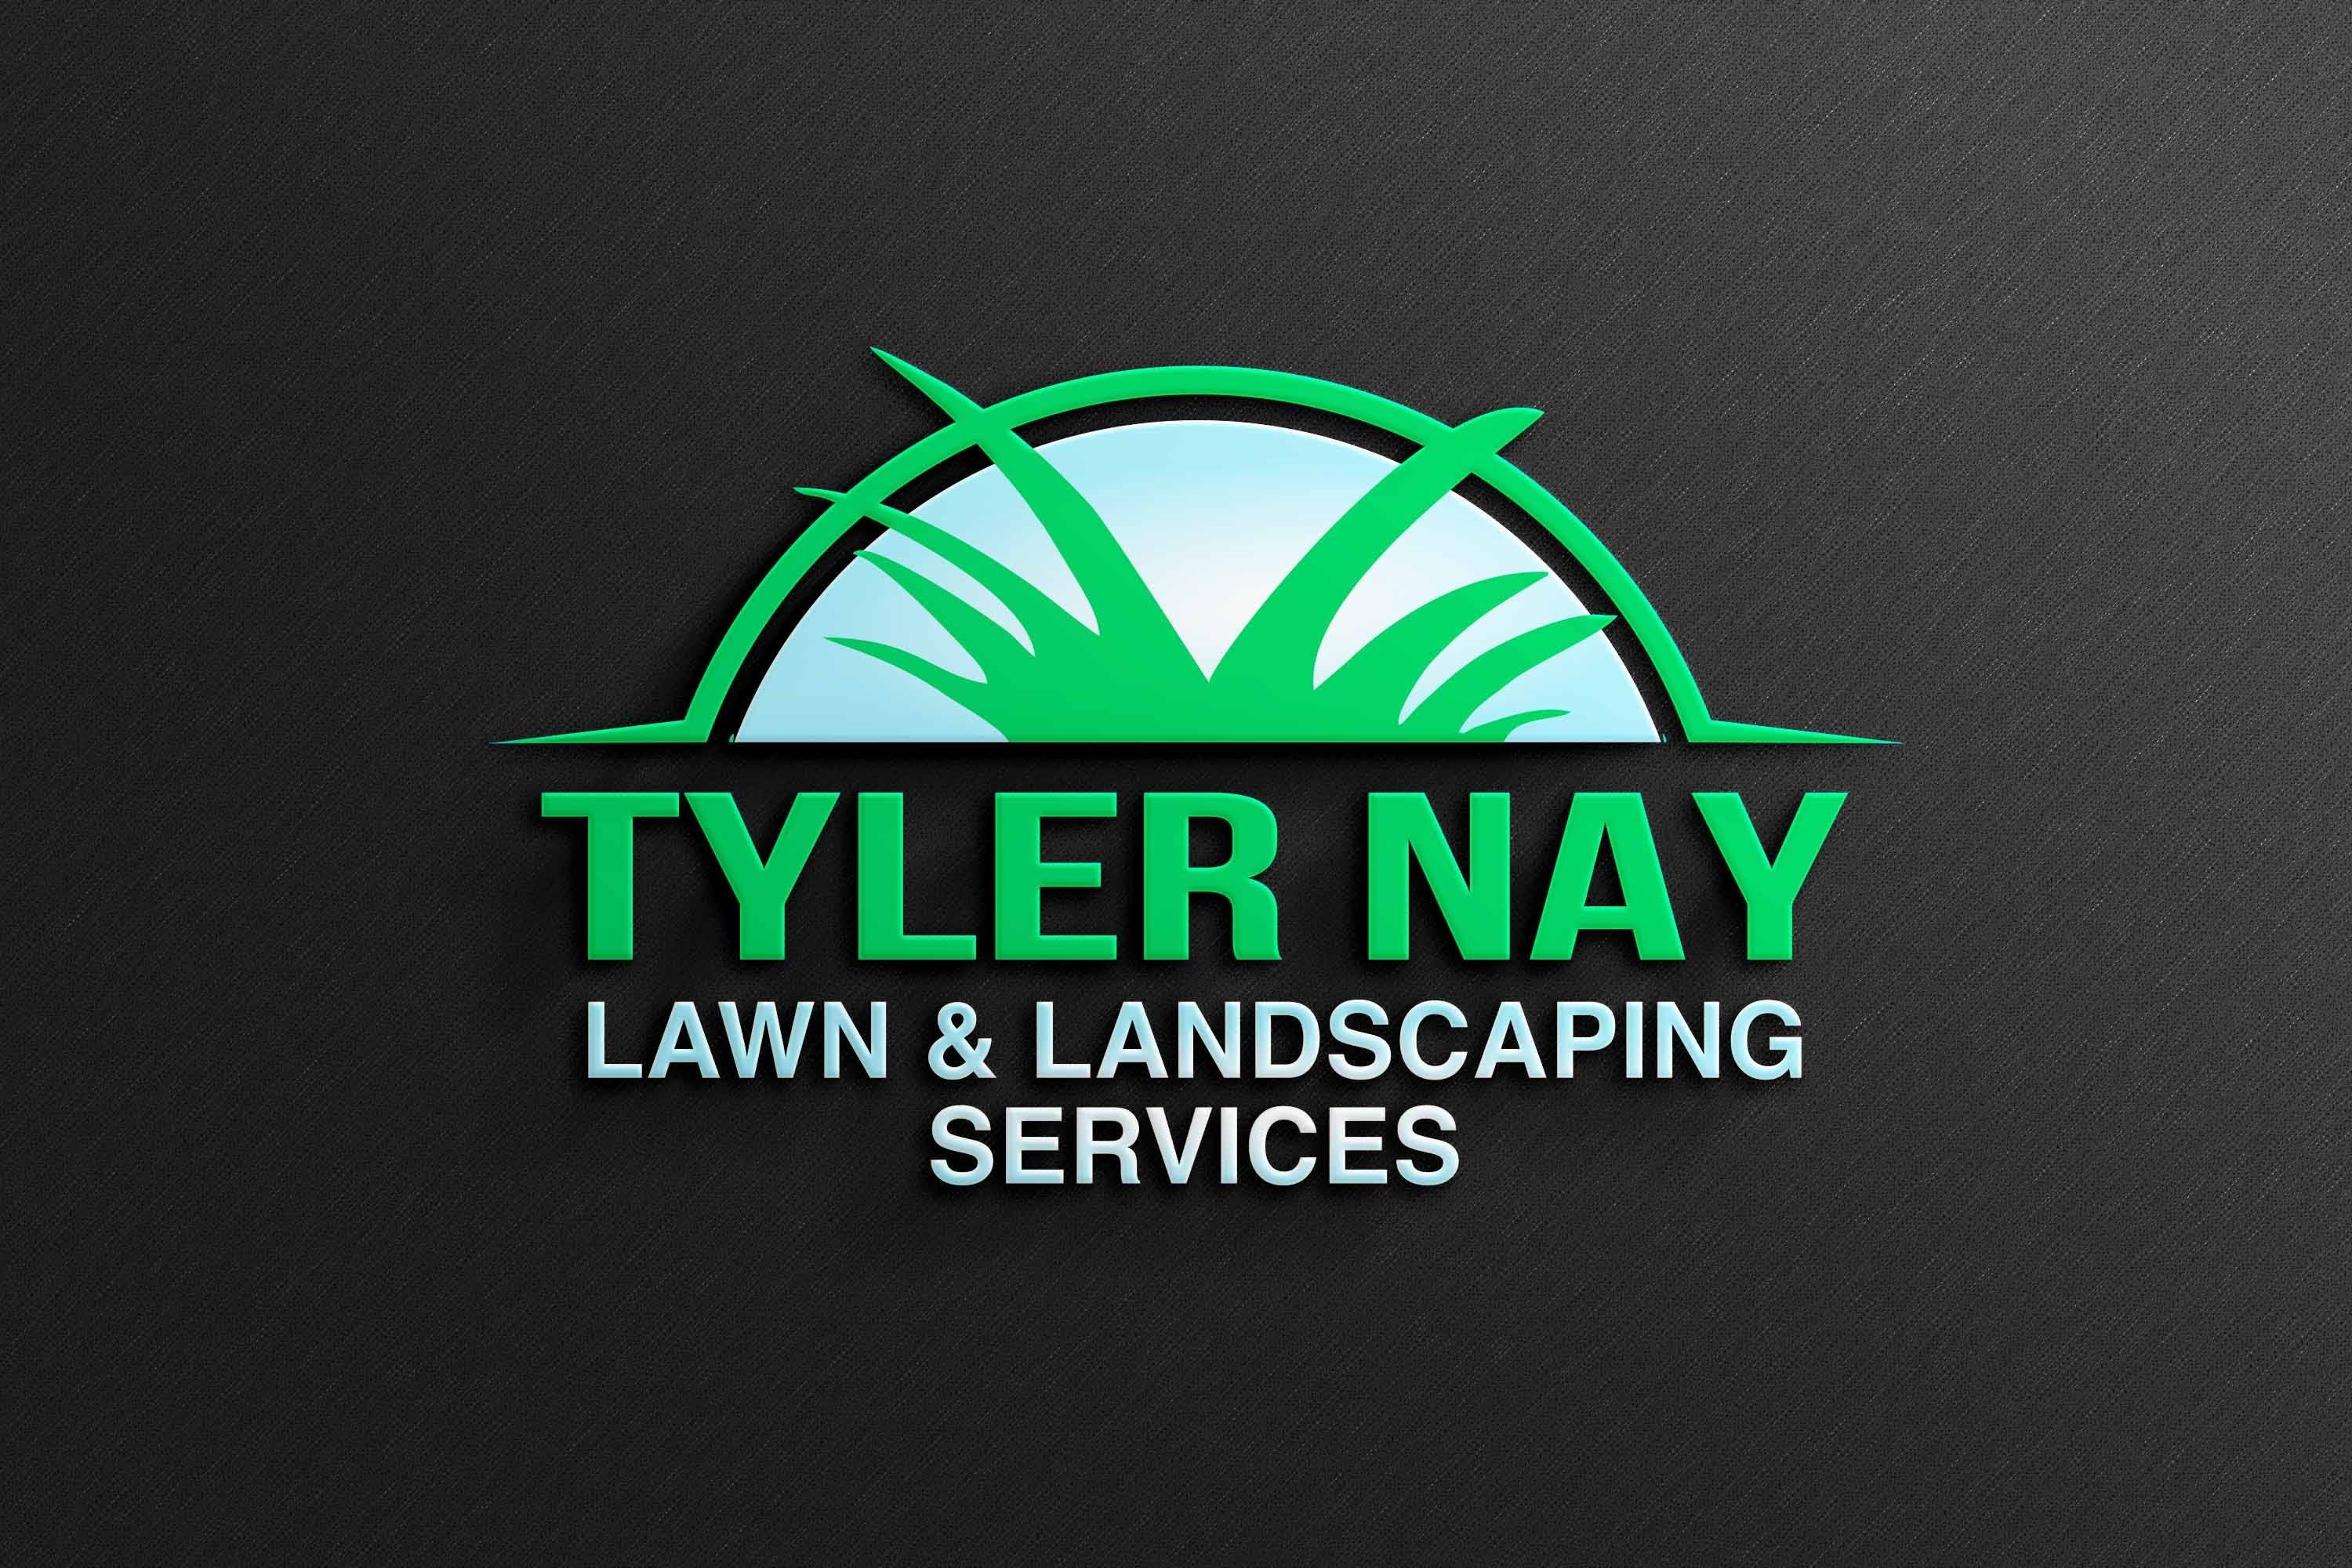 Tyler Nay Lawn and Landscaping Services Logo